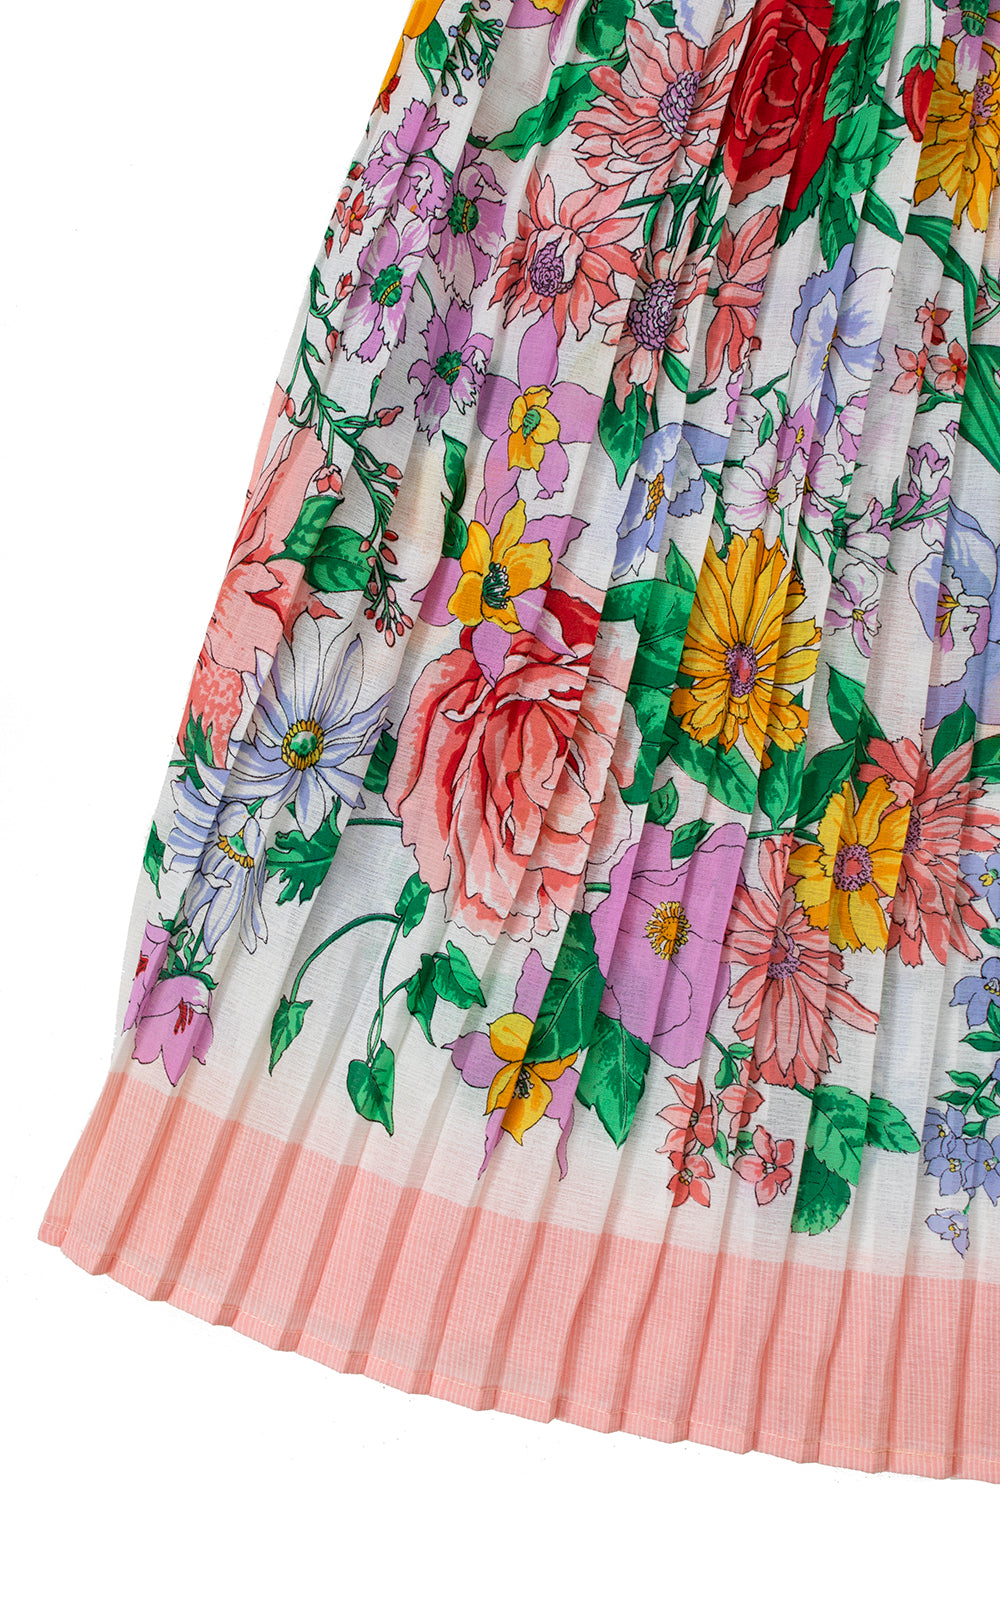 1980s Floral Accordion Pleated Skirt | x-small/small/medium